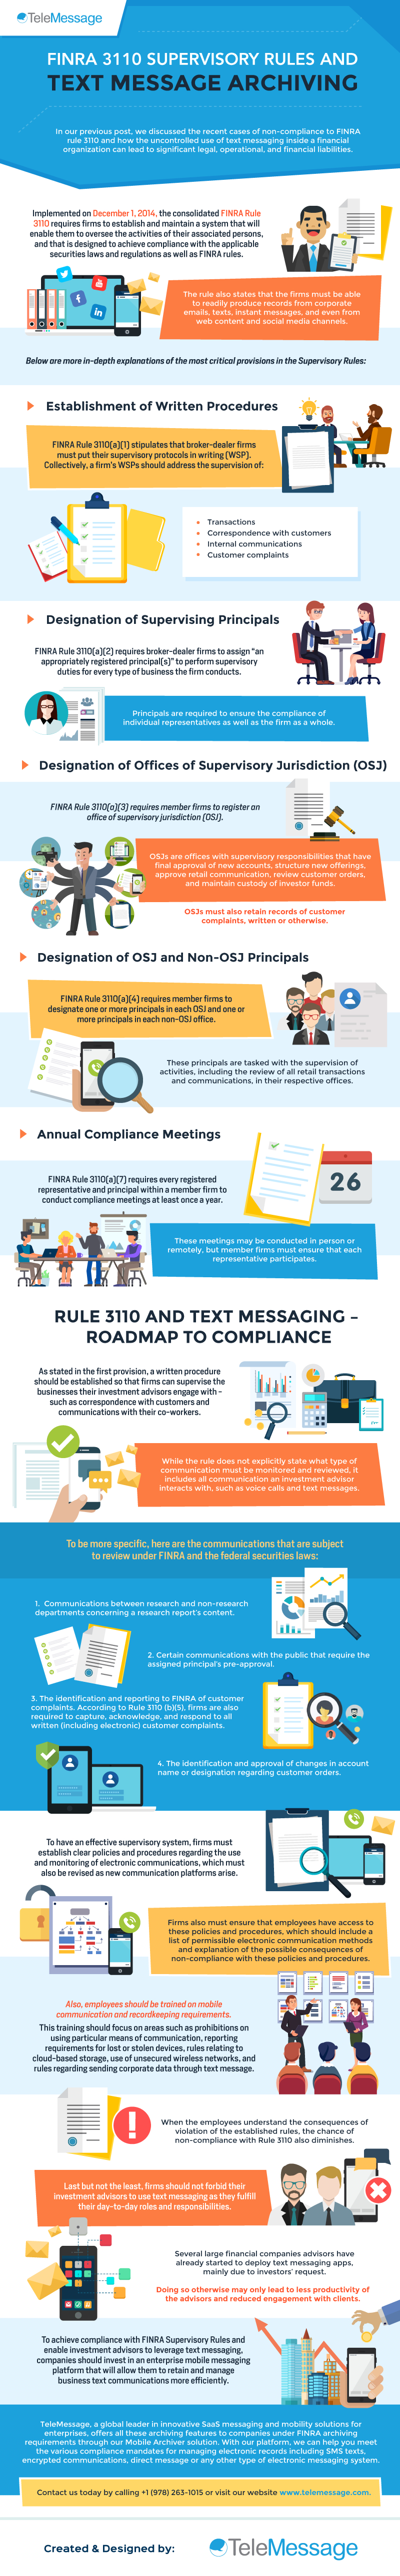 Finra Membership Agreement Finra 3110 Supervisory Rules And Finra Text Message Archiving